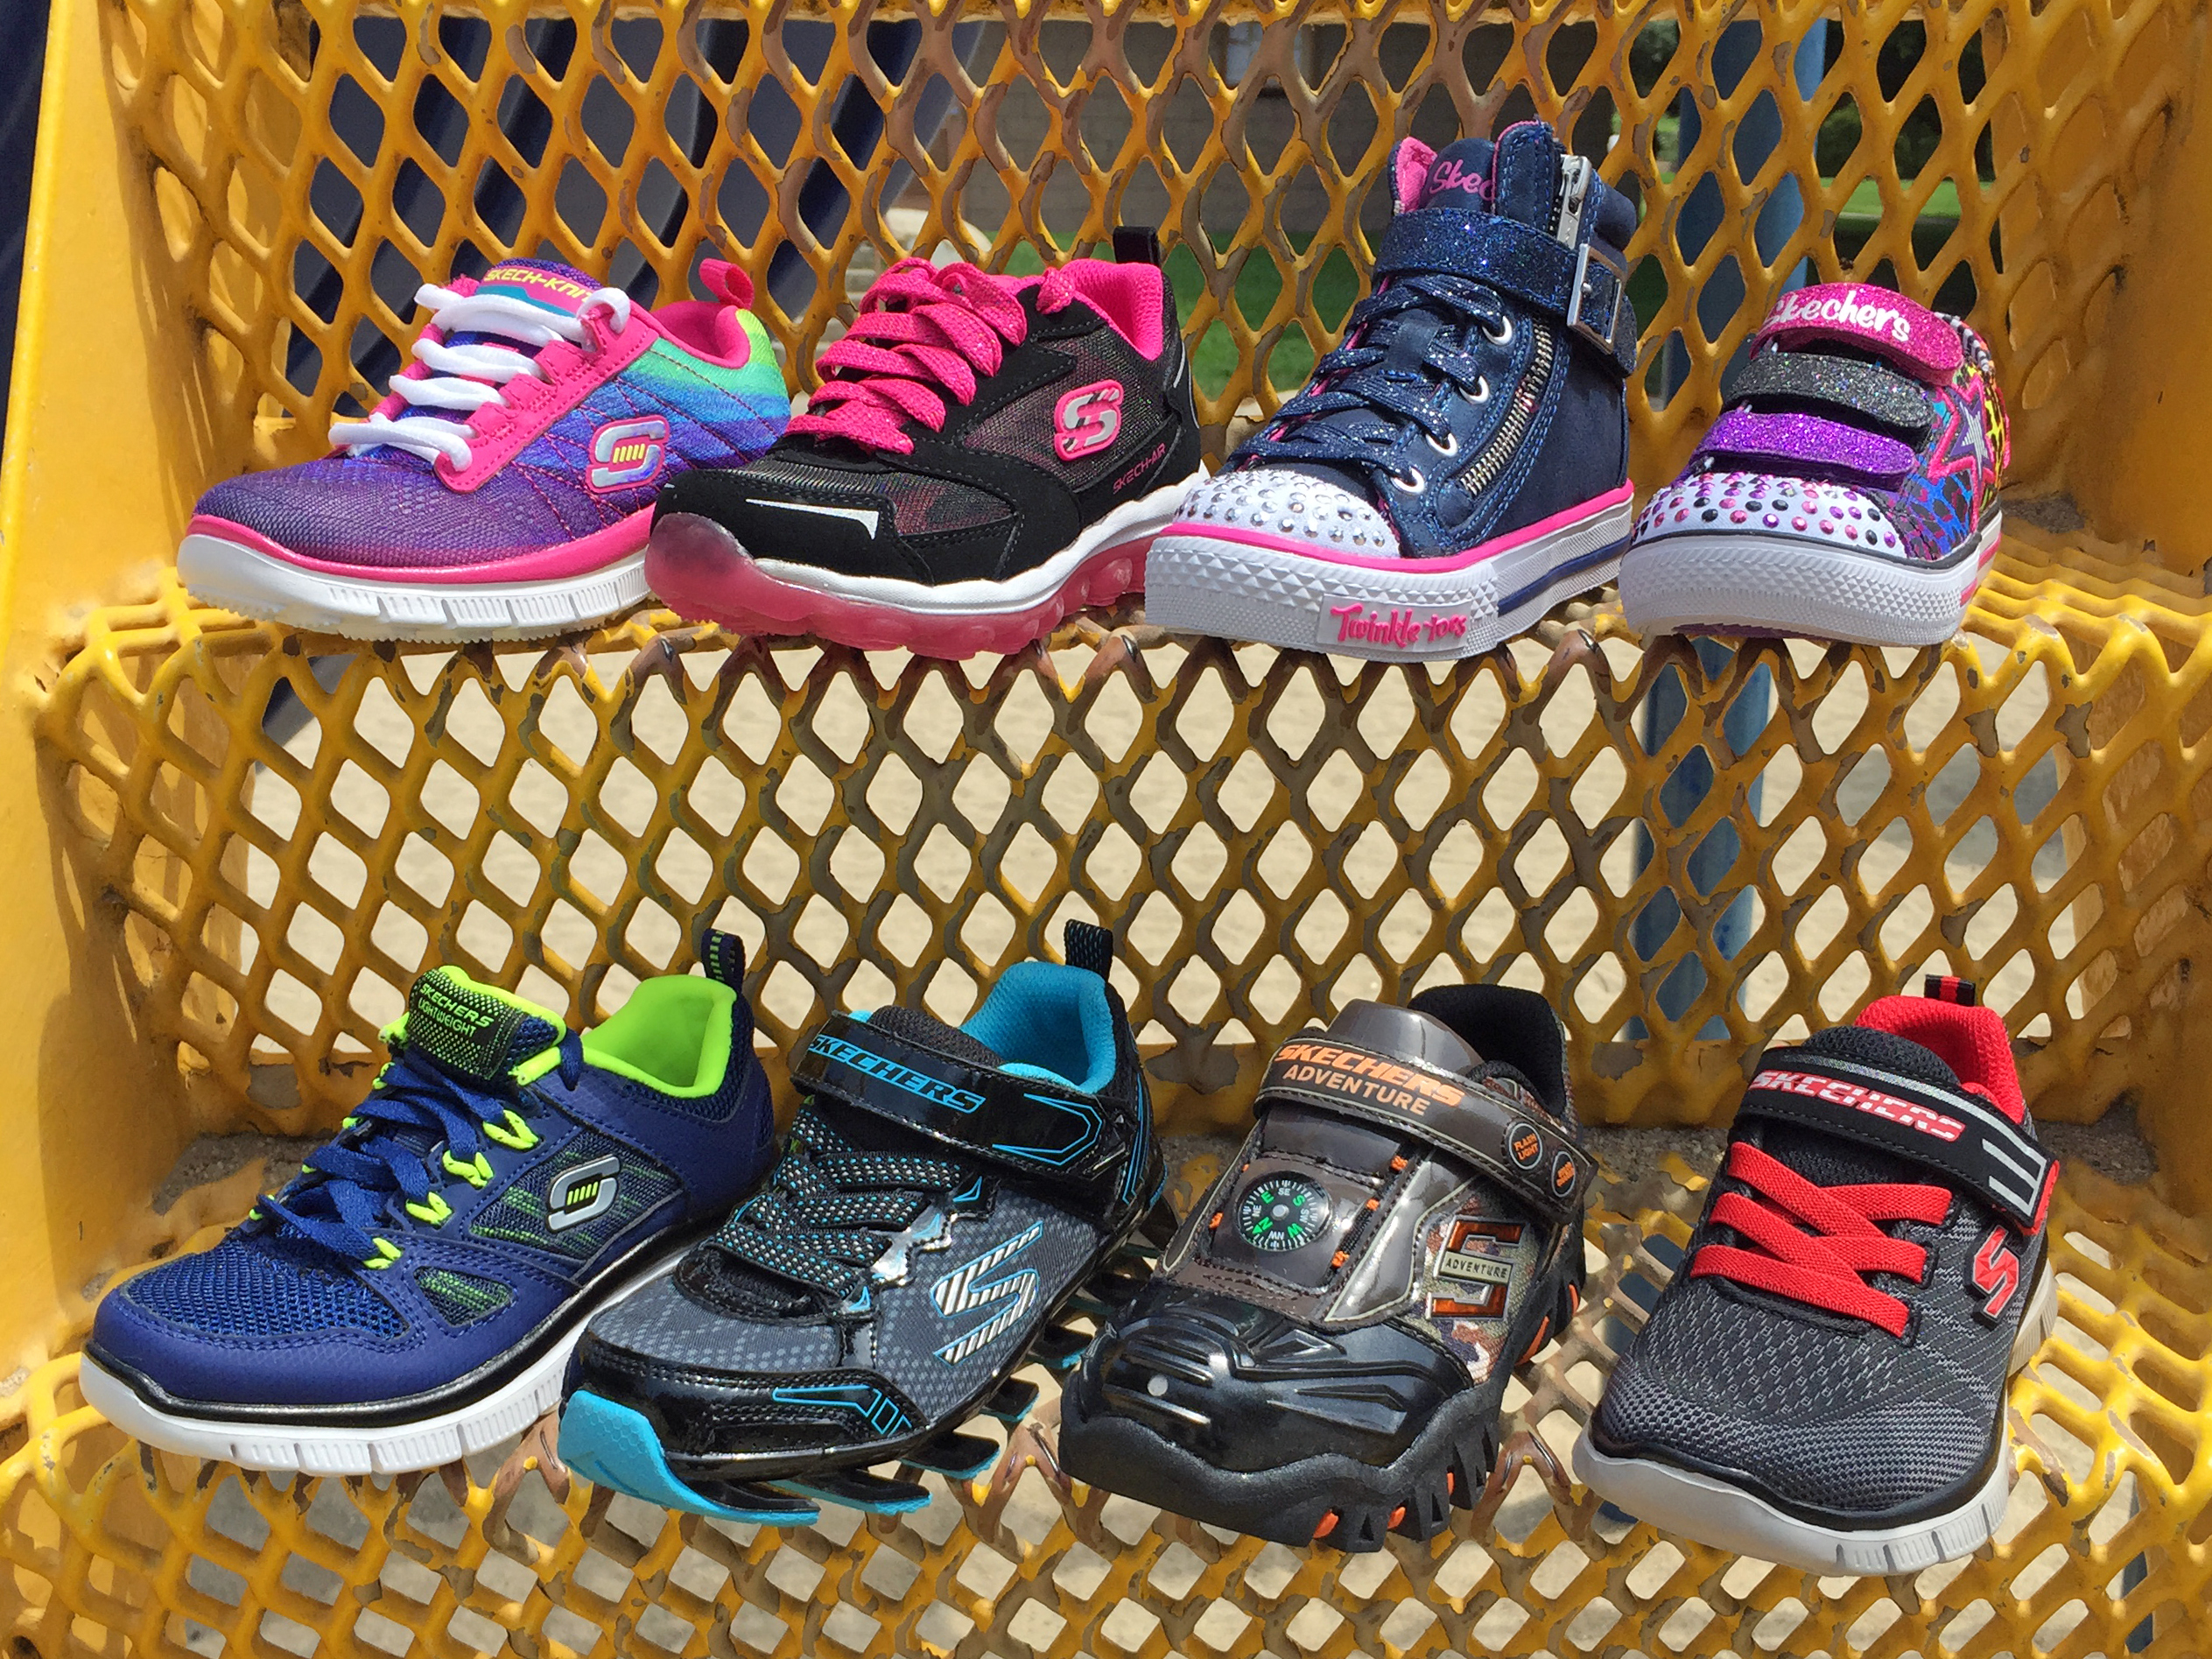 skechers shoes for kids